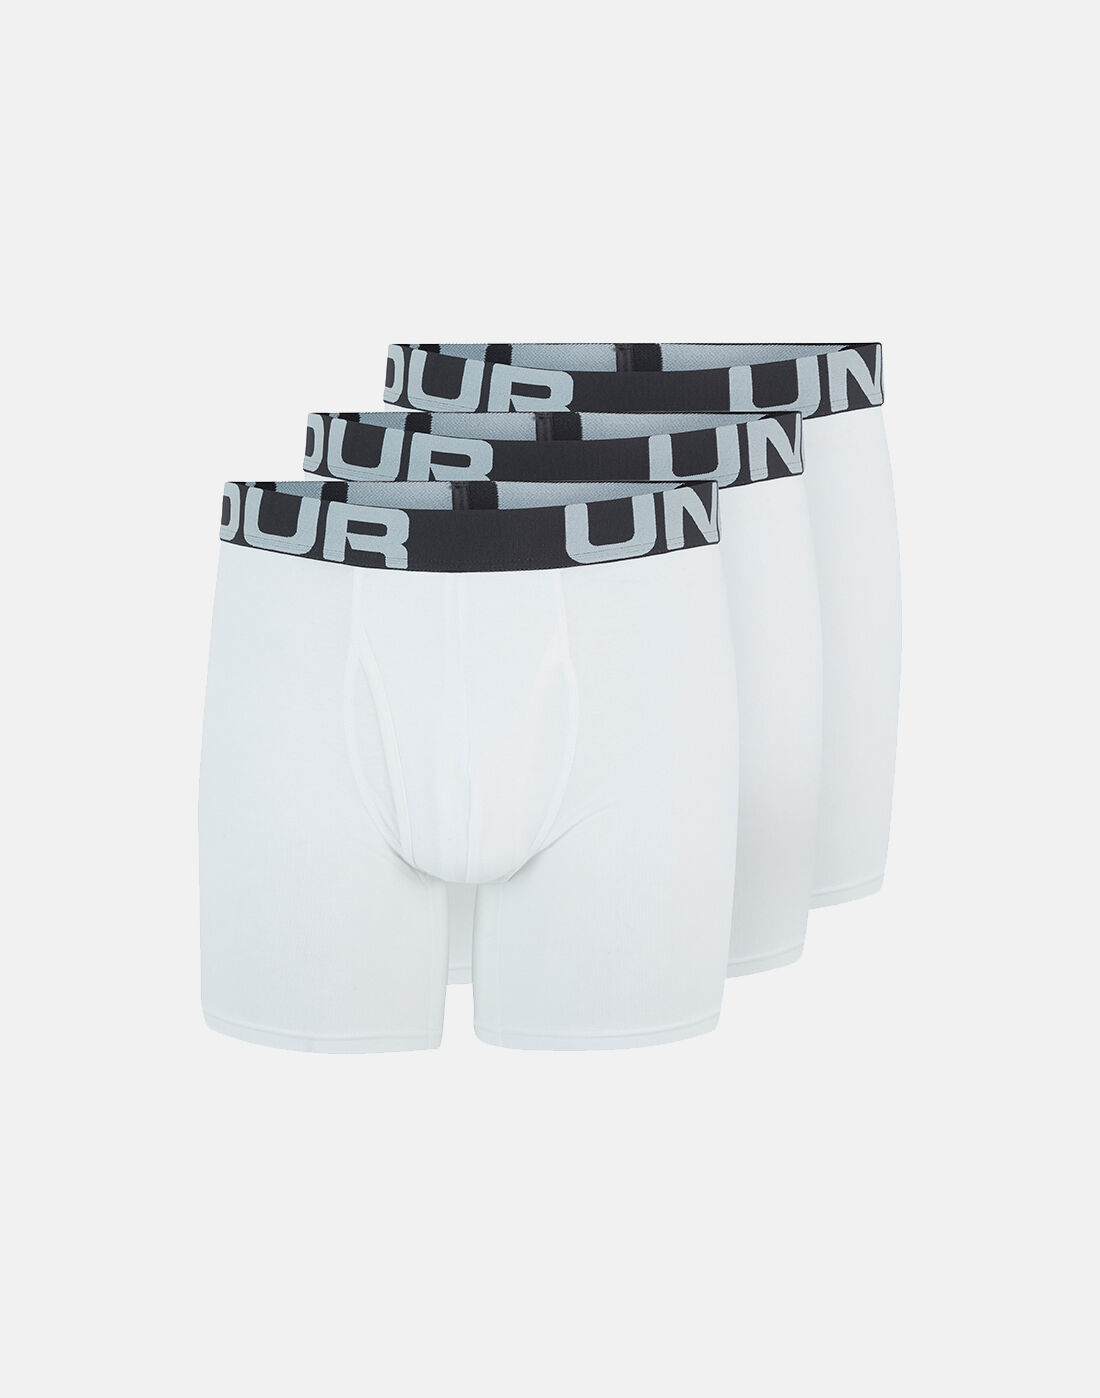 adidas boxers 3 pack